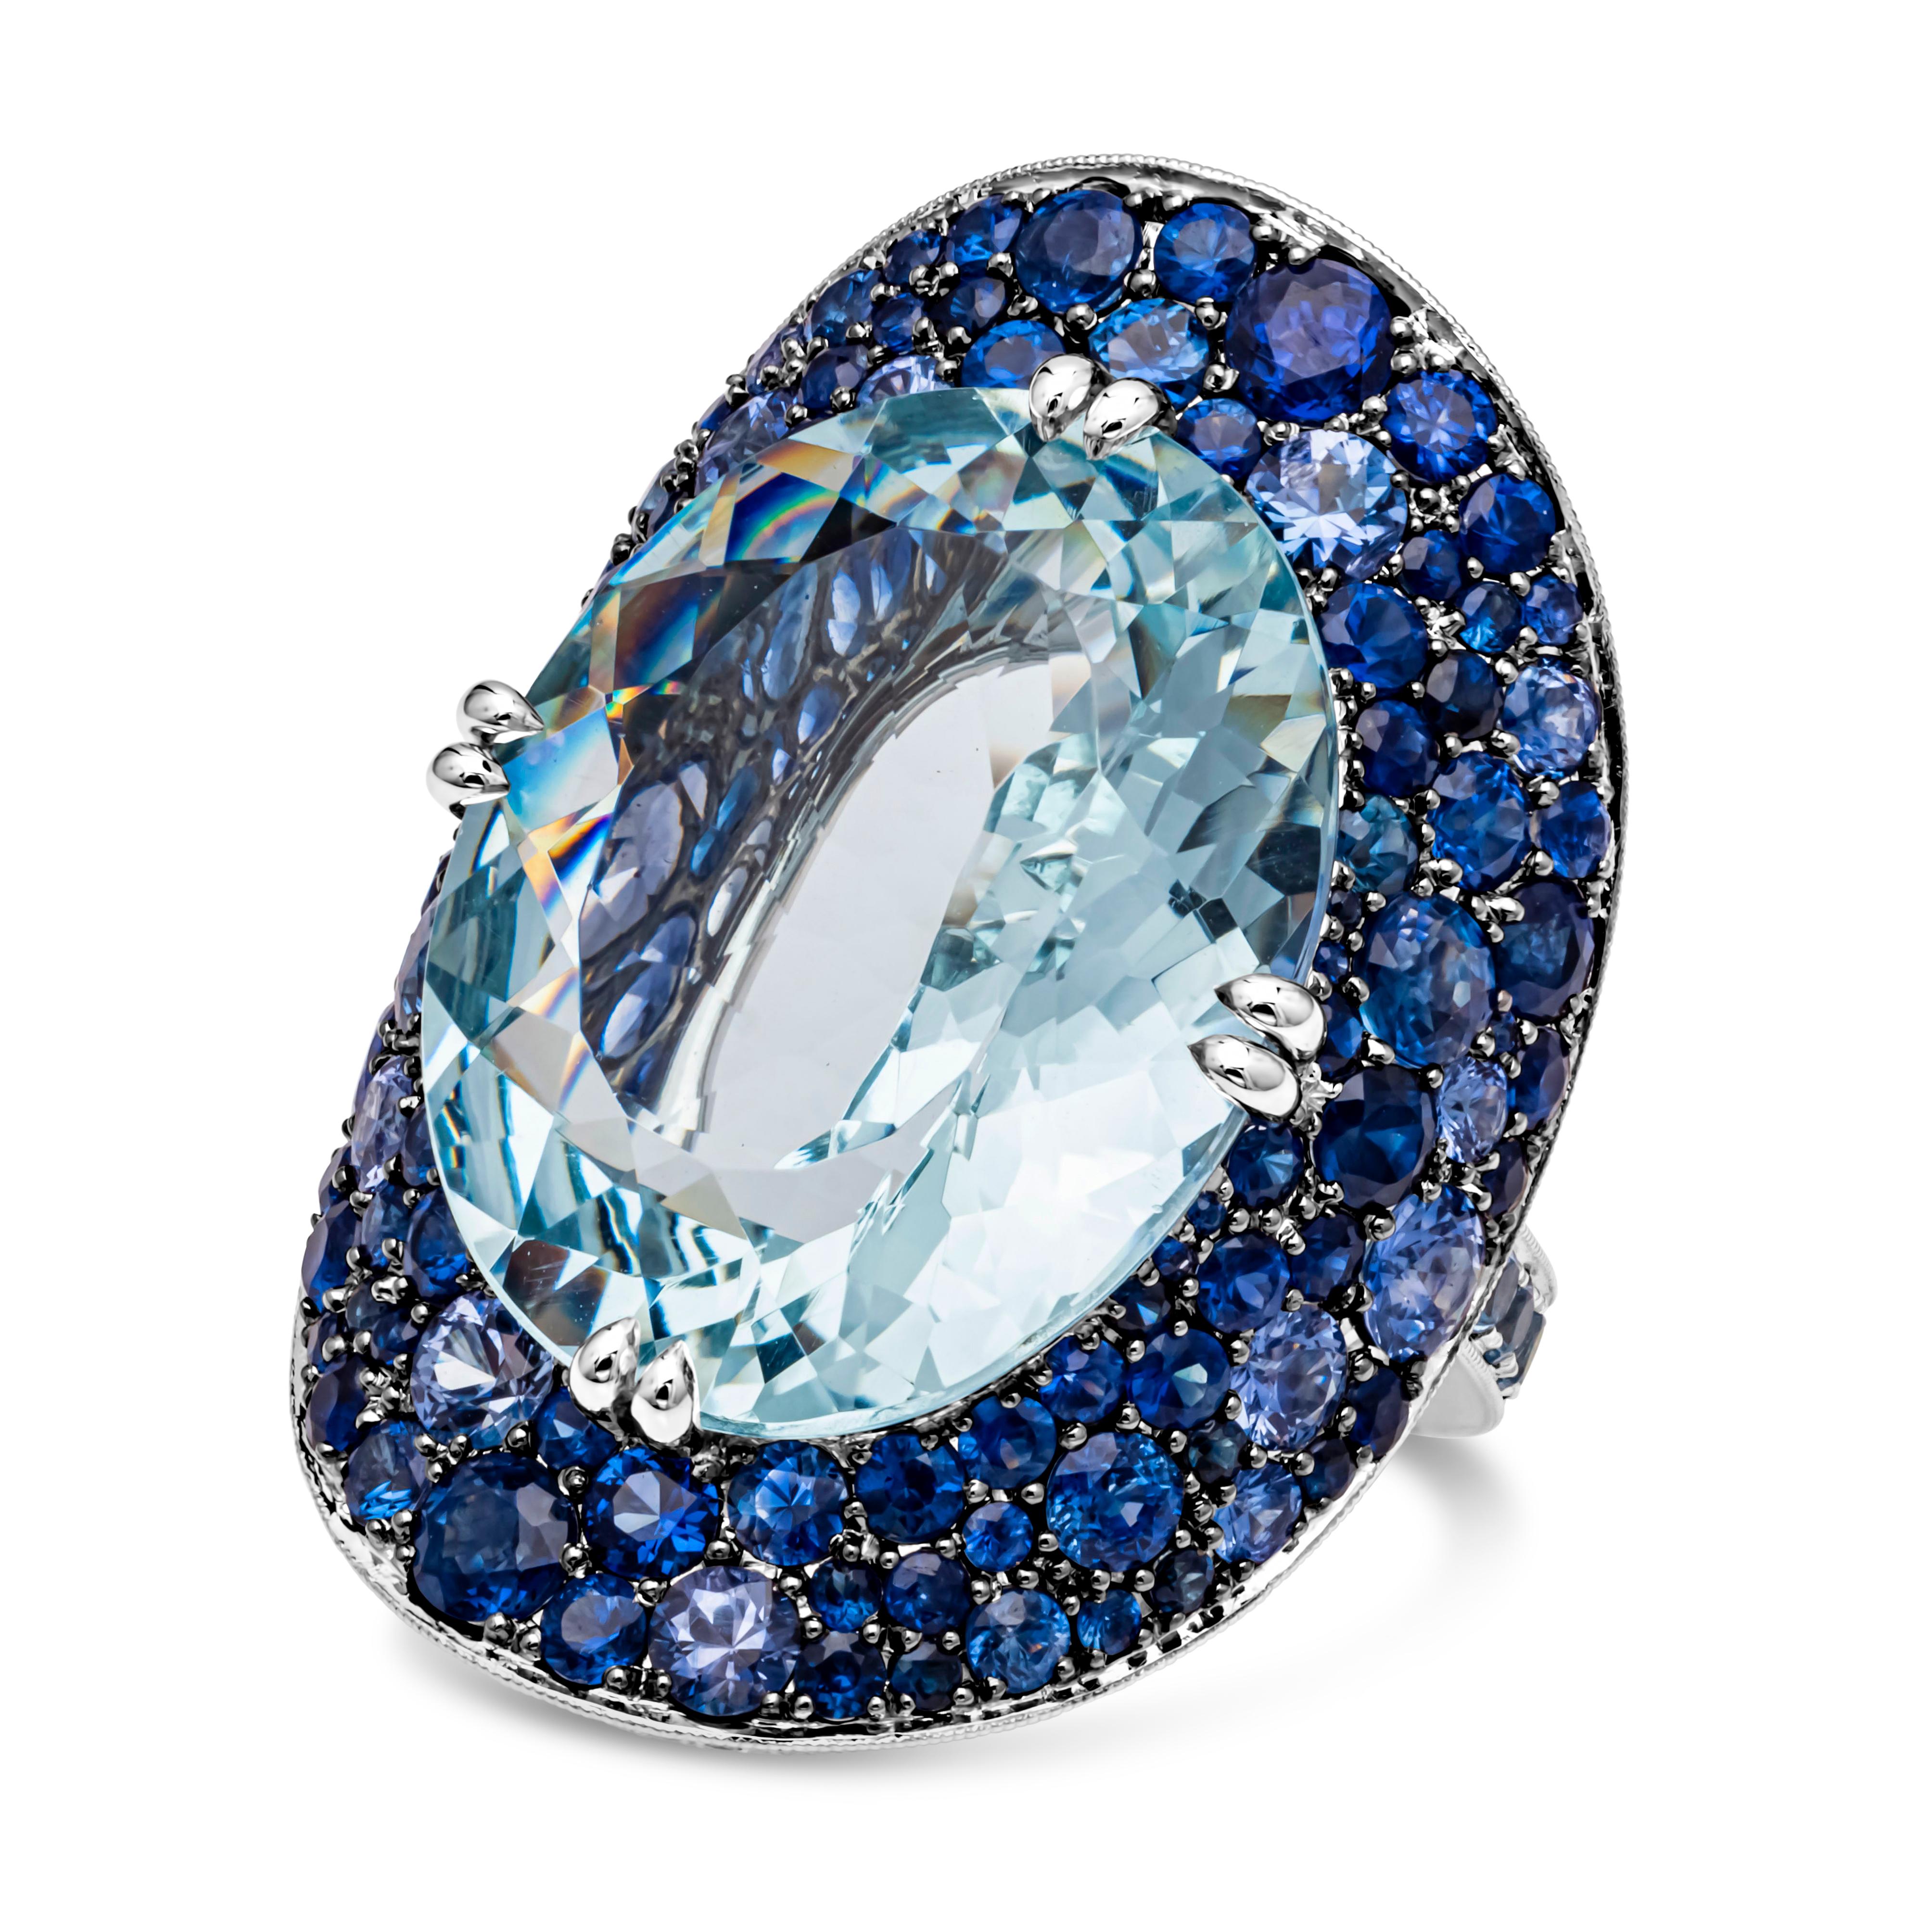 A beautiful and artistic large bonnet ring, showcasing an oval cut aquamarine weighing 19.69 carats total, set on a timeless eight prong basket setting made of 18K white gold. Surrounded by round brilliant blue sapphires and aquamarines in a pavé